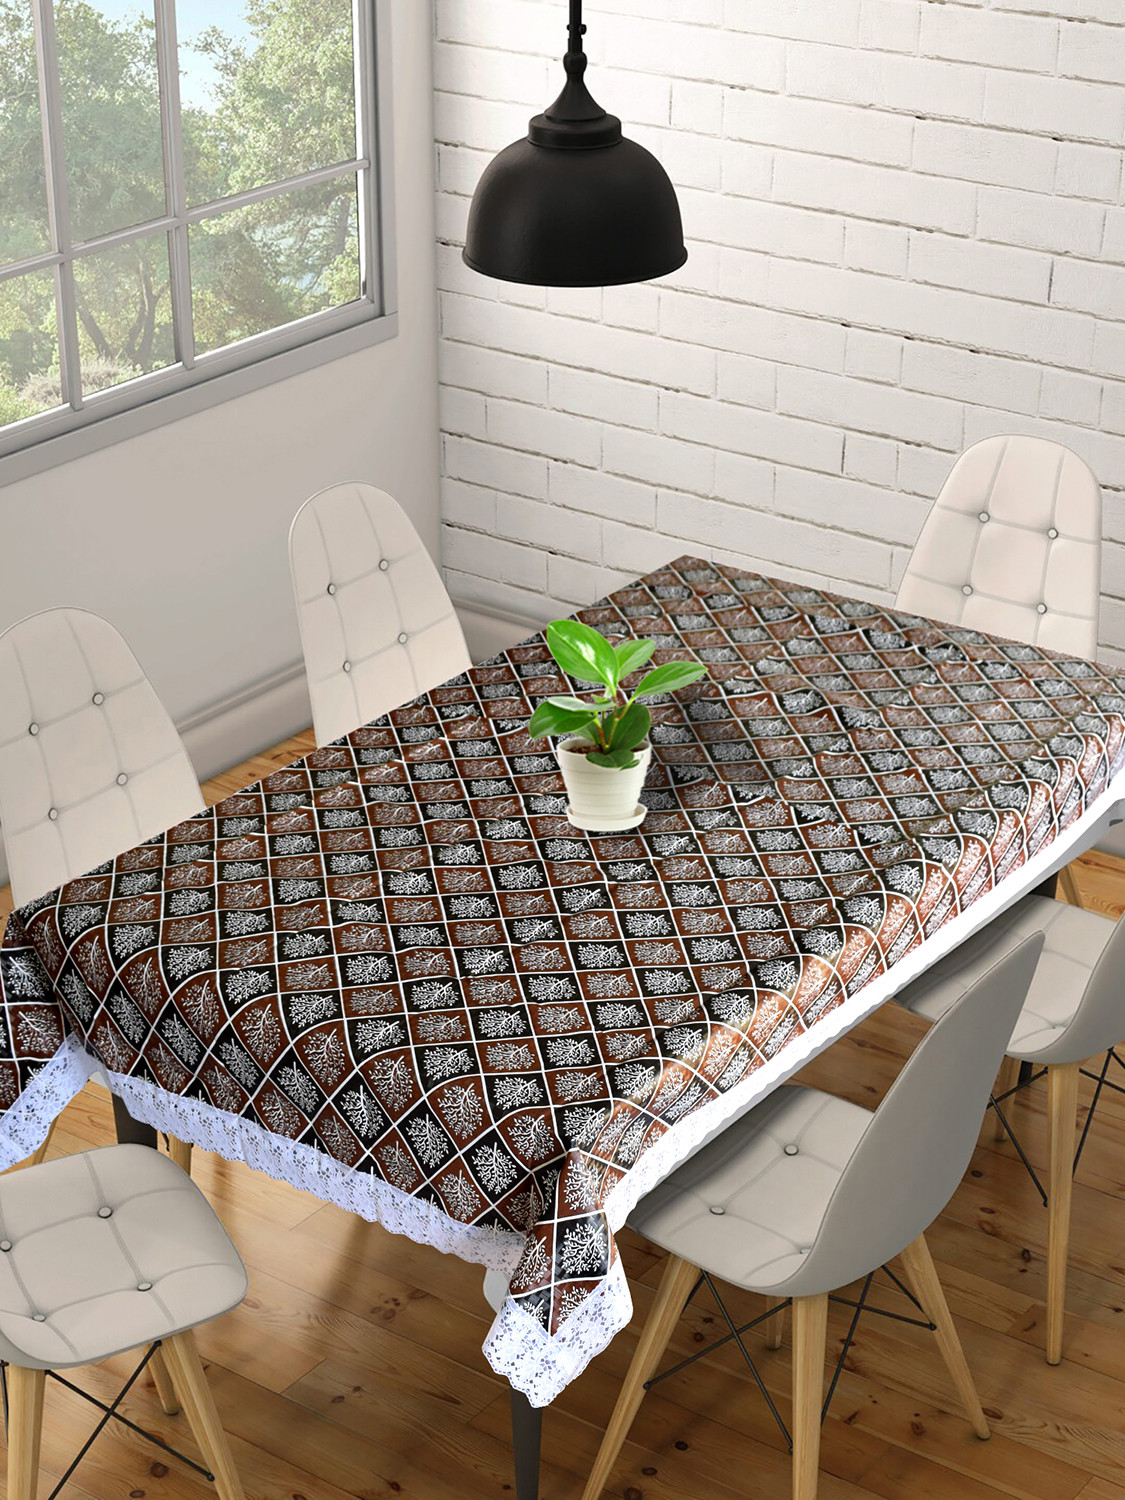 Kuber Industries Leaf Printed PVC 6 Seater Dinning Table Cover, Protector With White Lace Border, 60